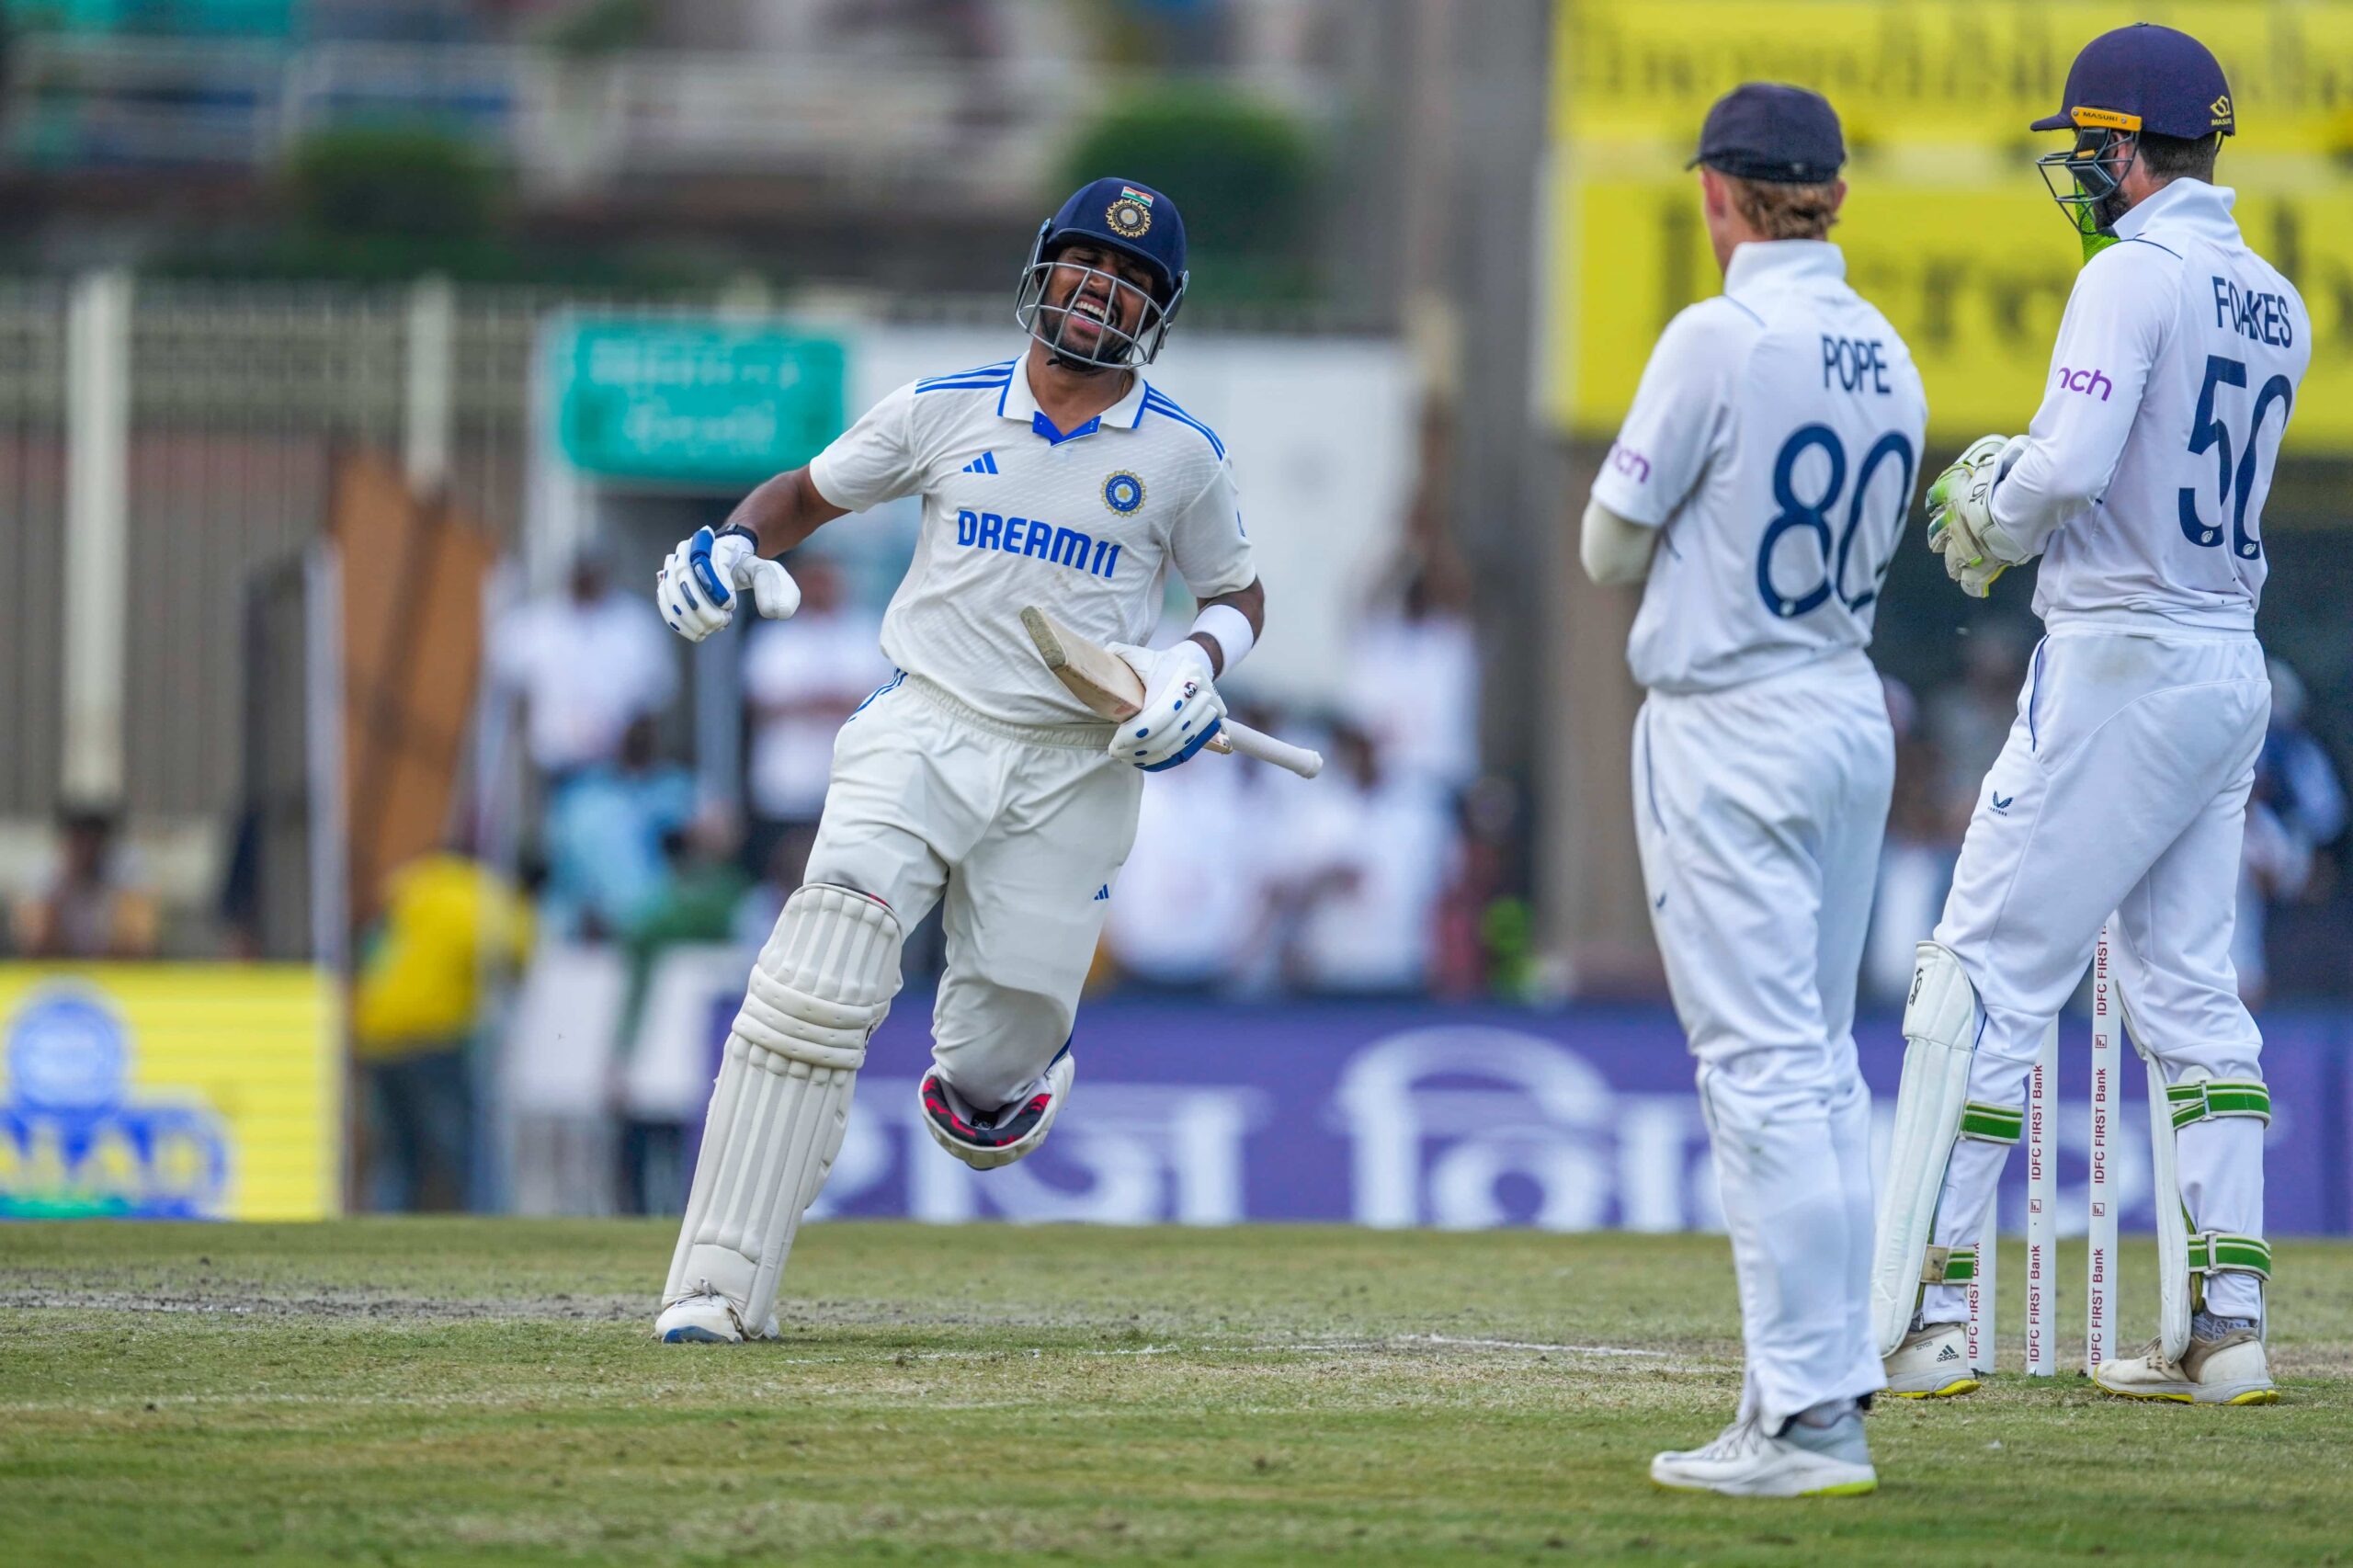 India vs England 4th Test Day 4 Highlights: INDIA win by 5 wickets; Gill and Jurel lead India to series victory.